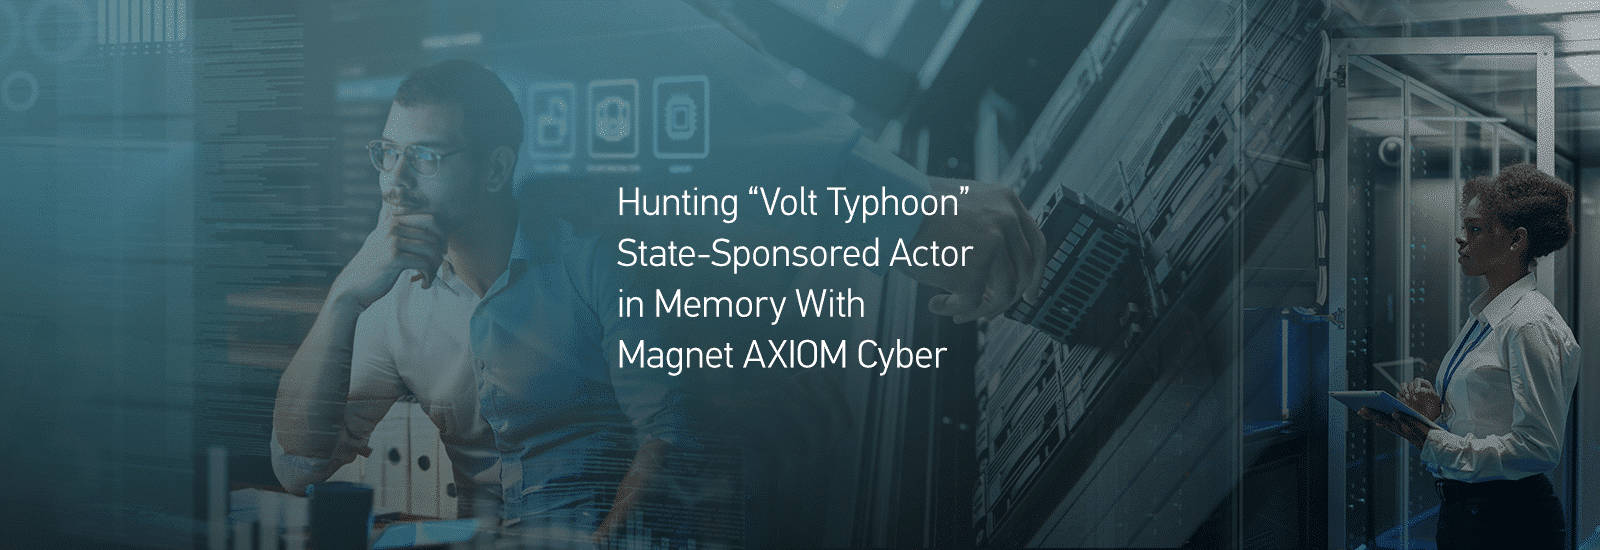 A decorative header for the post Hunting “Volt Typhoon” State-Sponsored Actor in Memory With Magnet AXIOM Cyber